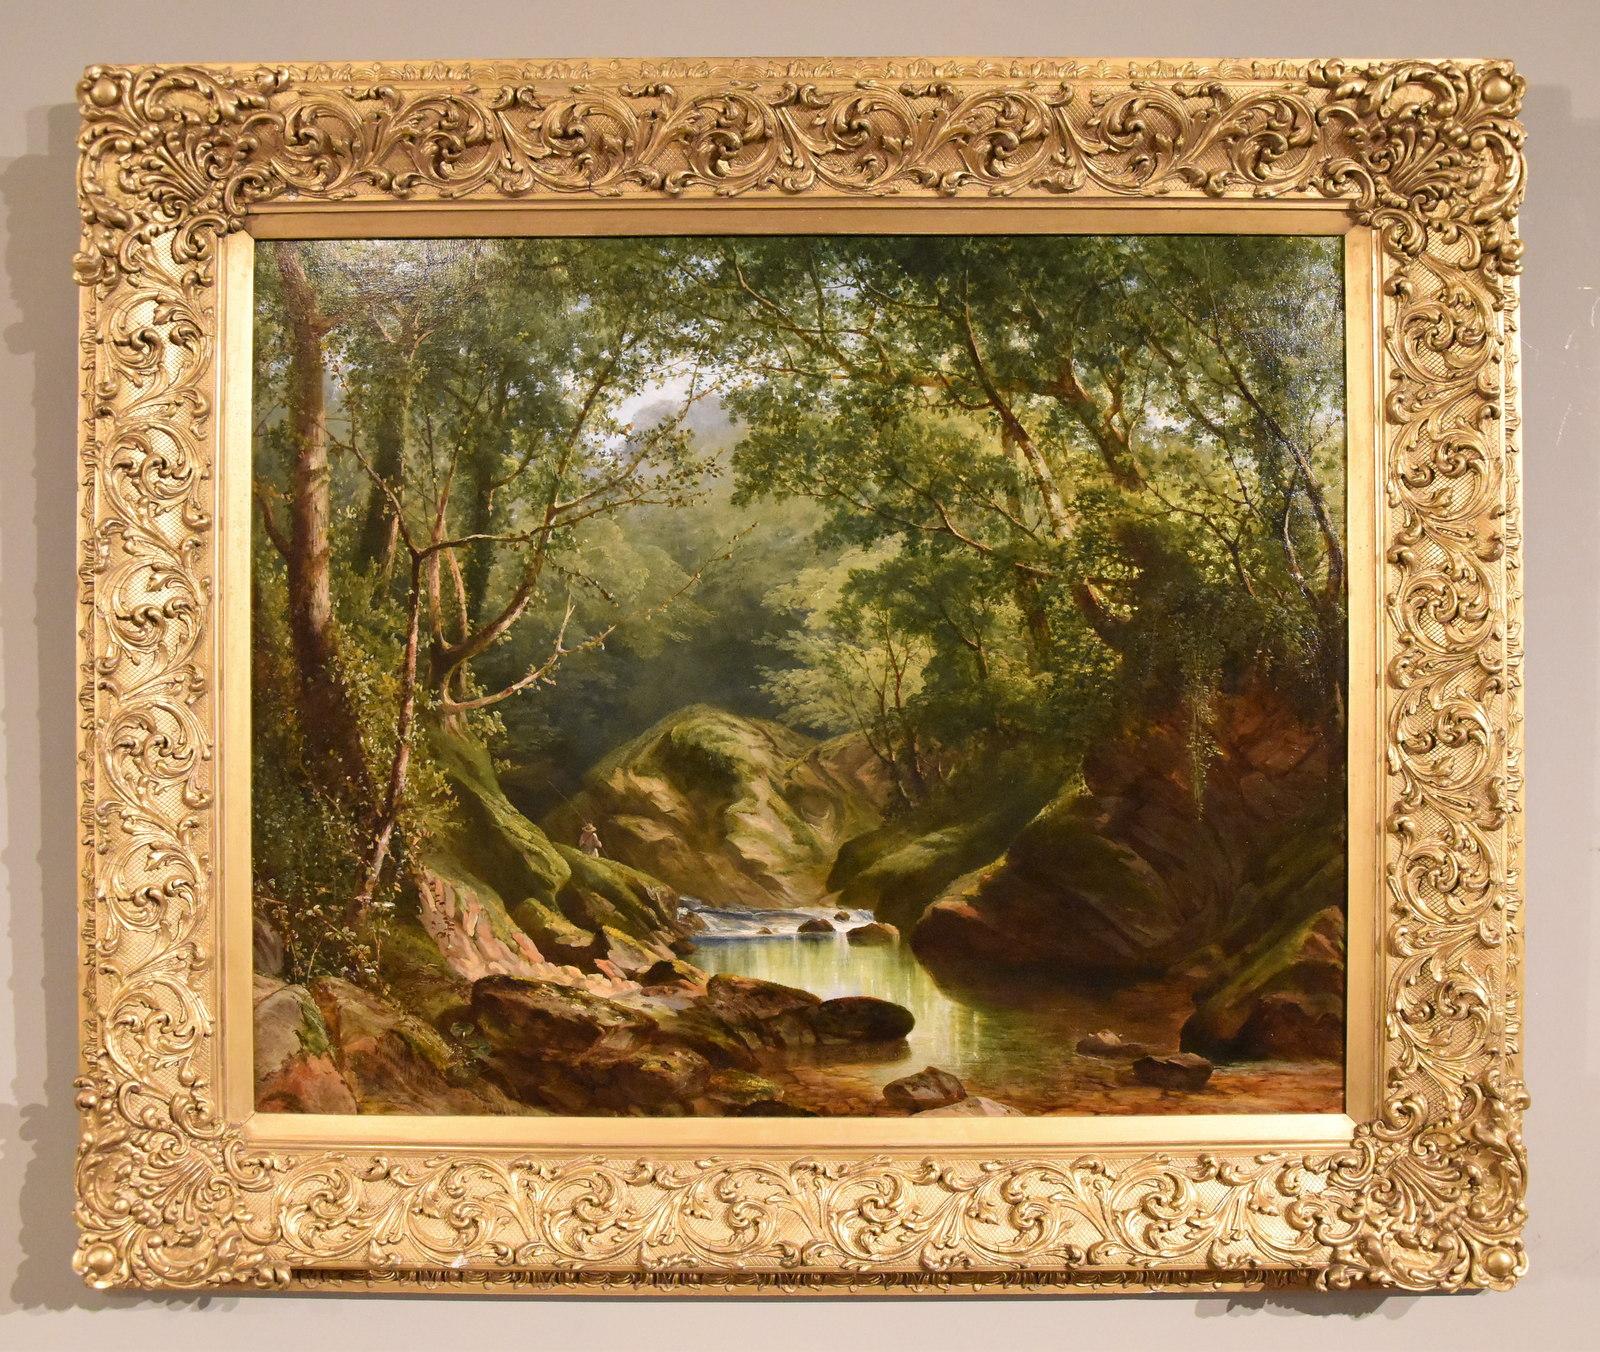 Oil painting by William Williams “On the Erme, Ivy Bridge, Devon” - Painting by William Williams (painter)